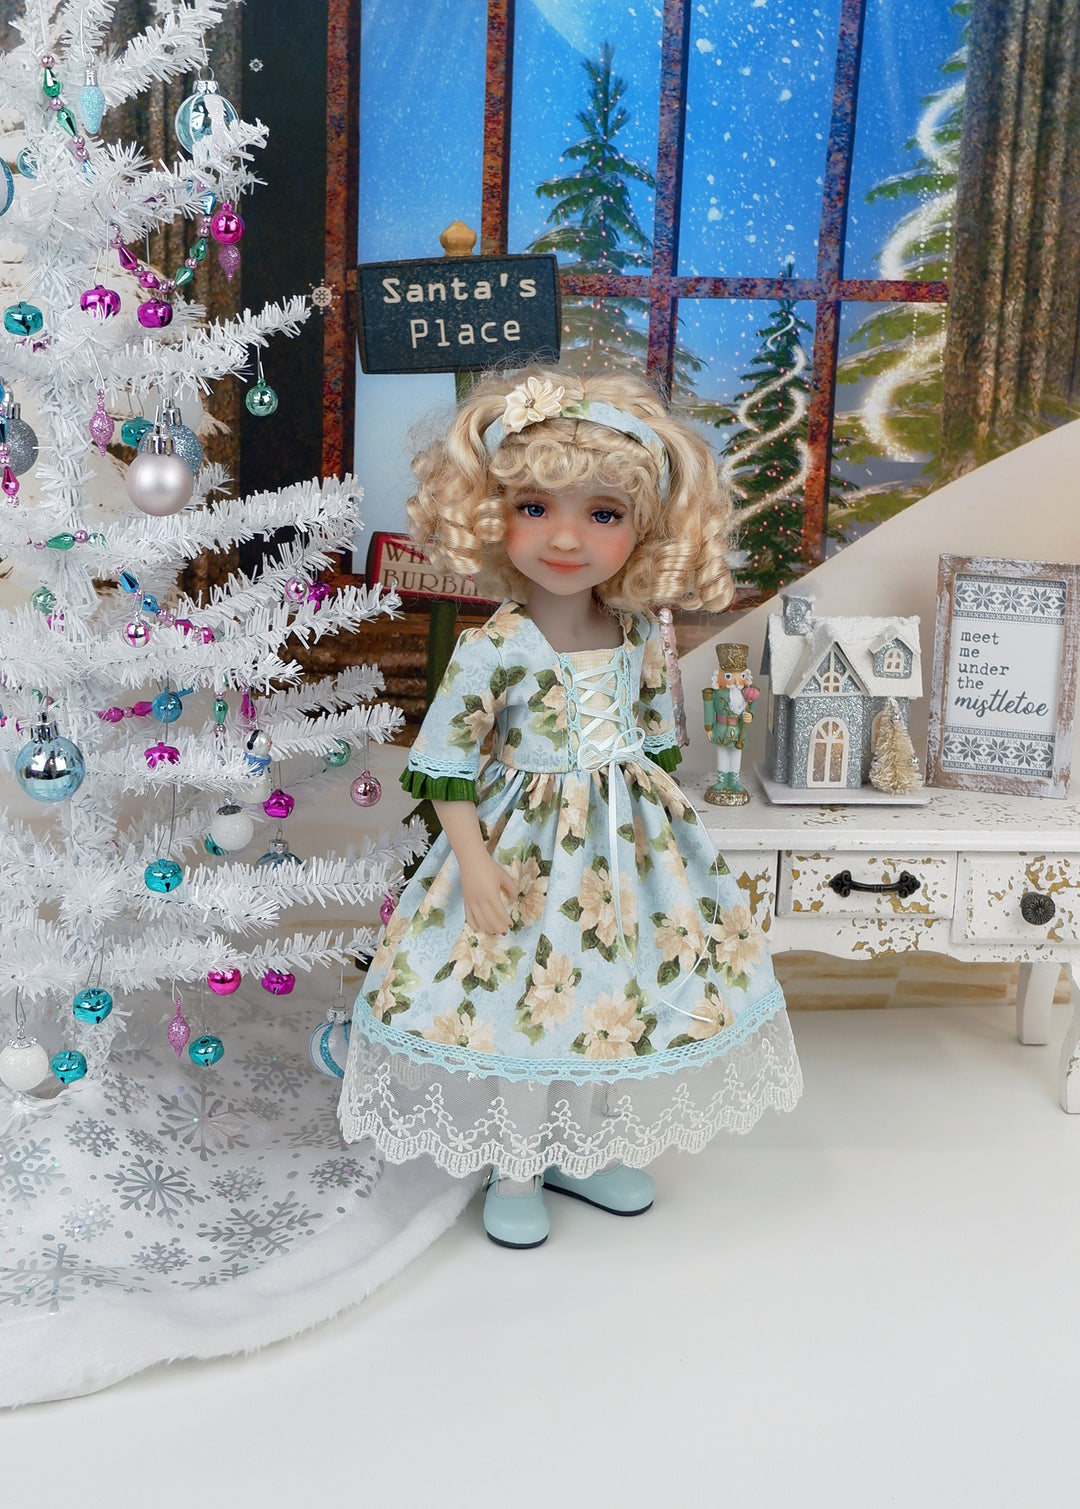 Poinsettias on Ice - dirndl dress ensemble with shoes for Ruby Red Fashion Friends doll